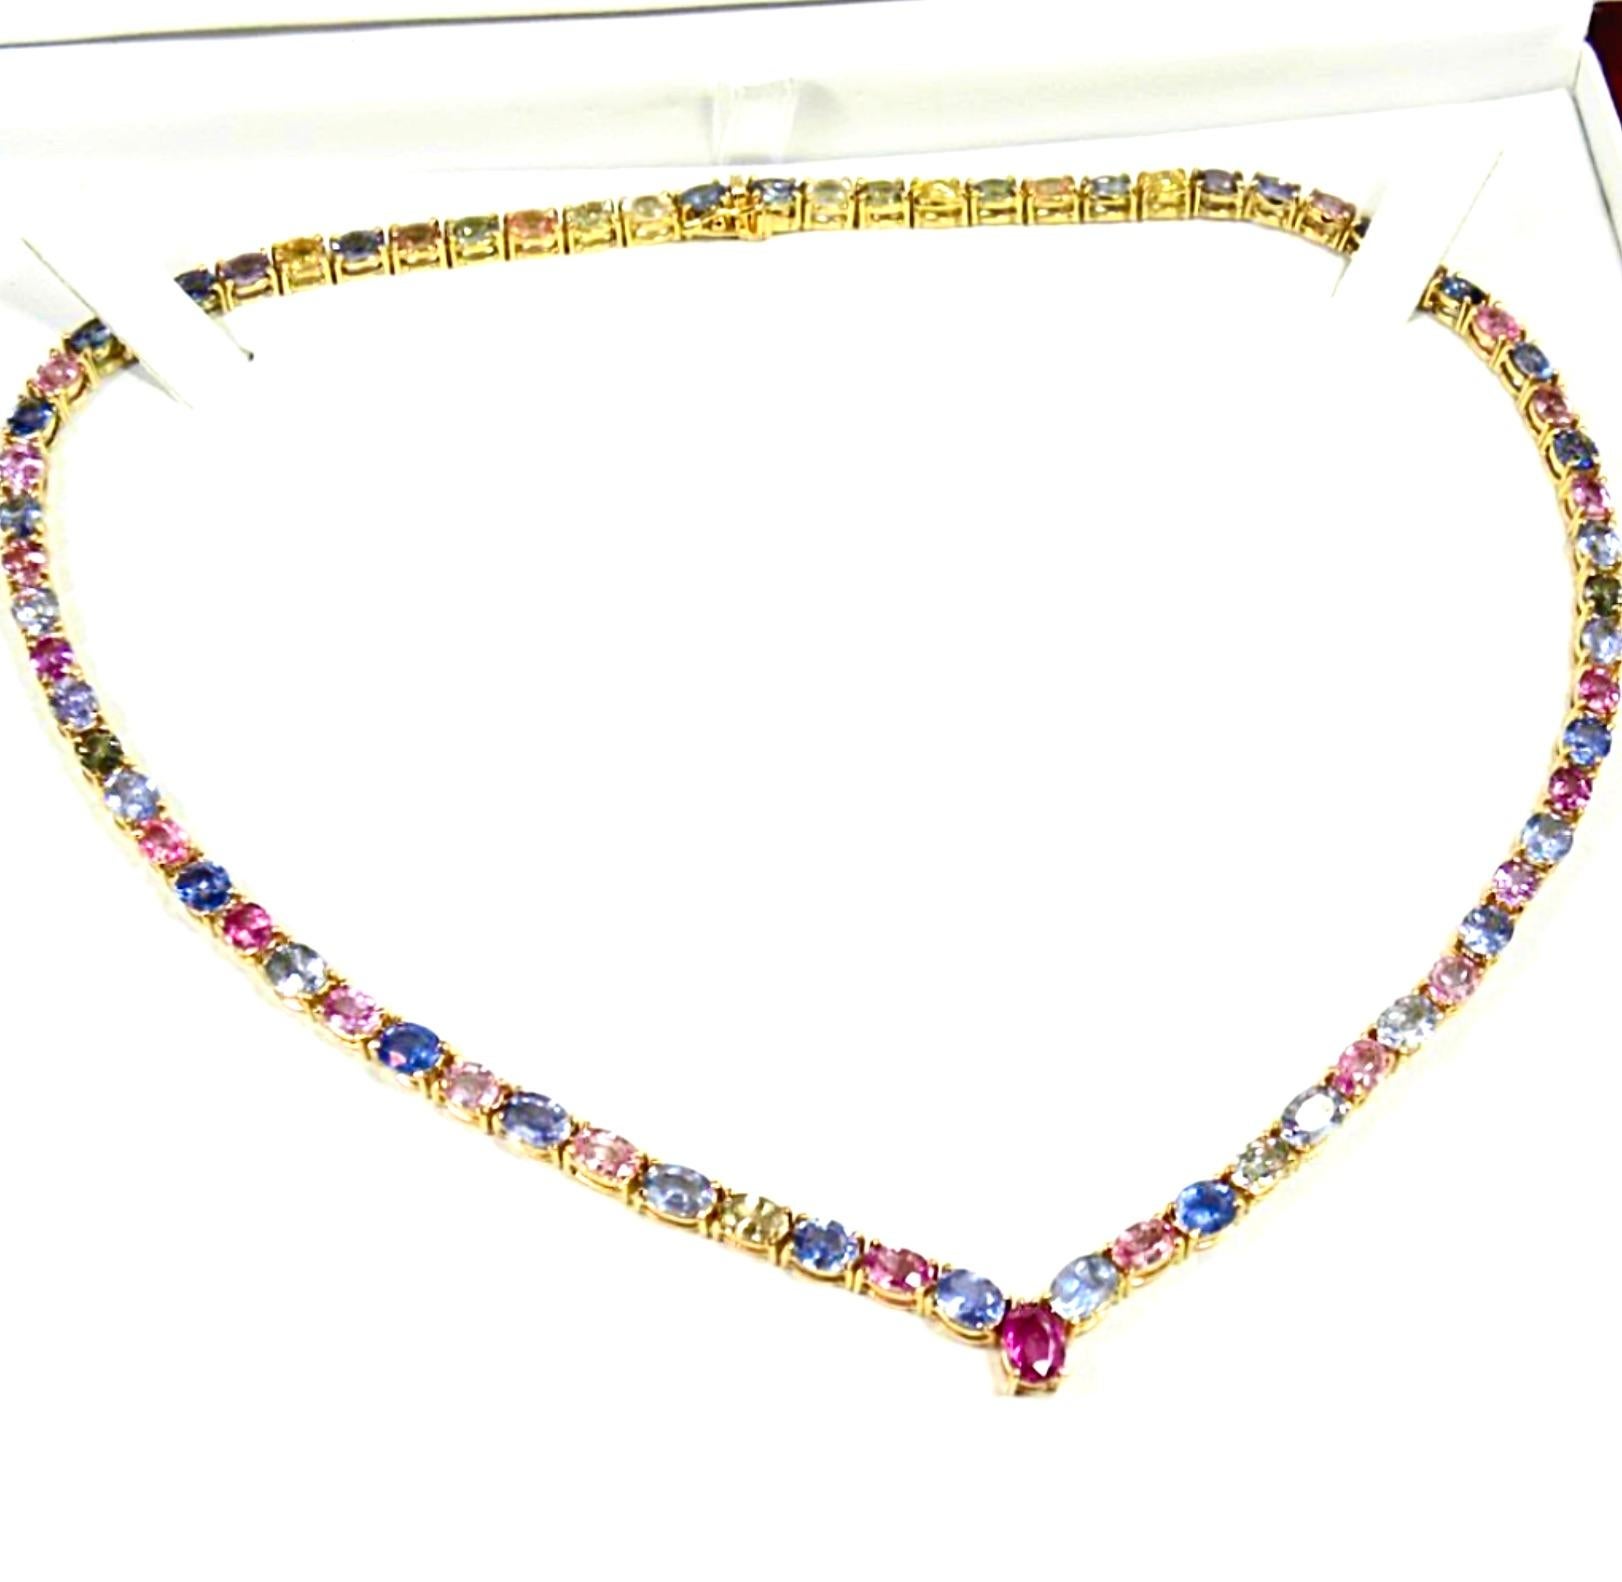  50.00 Carat Burma Unheated Multicolor Sapphires Necklace Yellow Gold 18K  For Sale 1